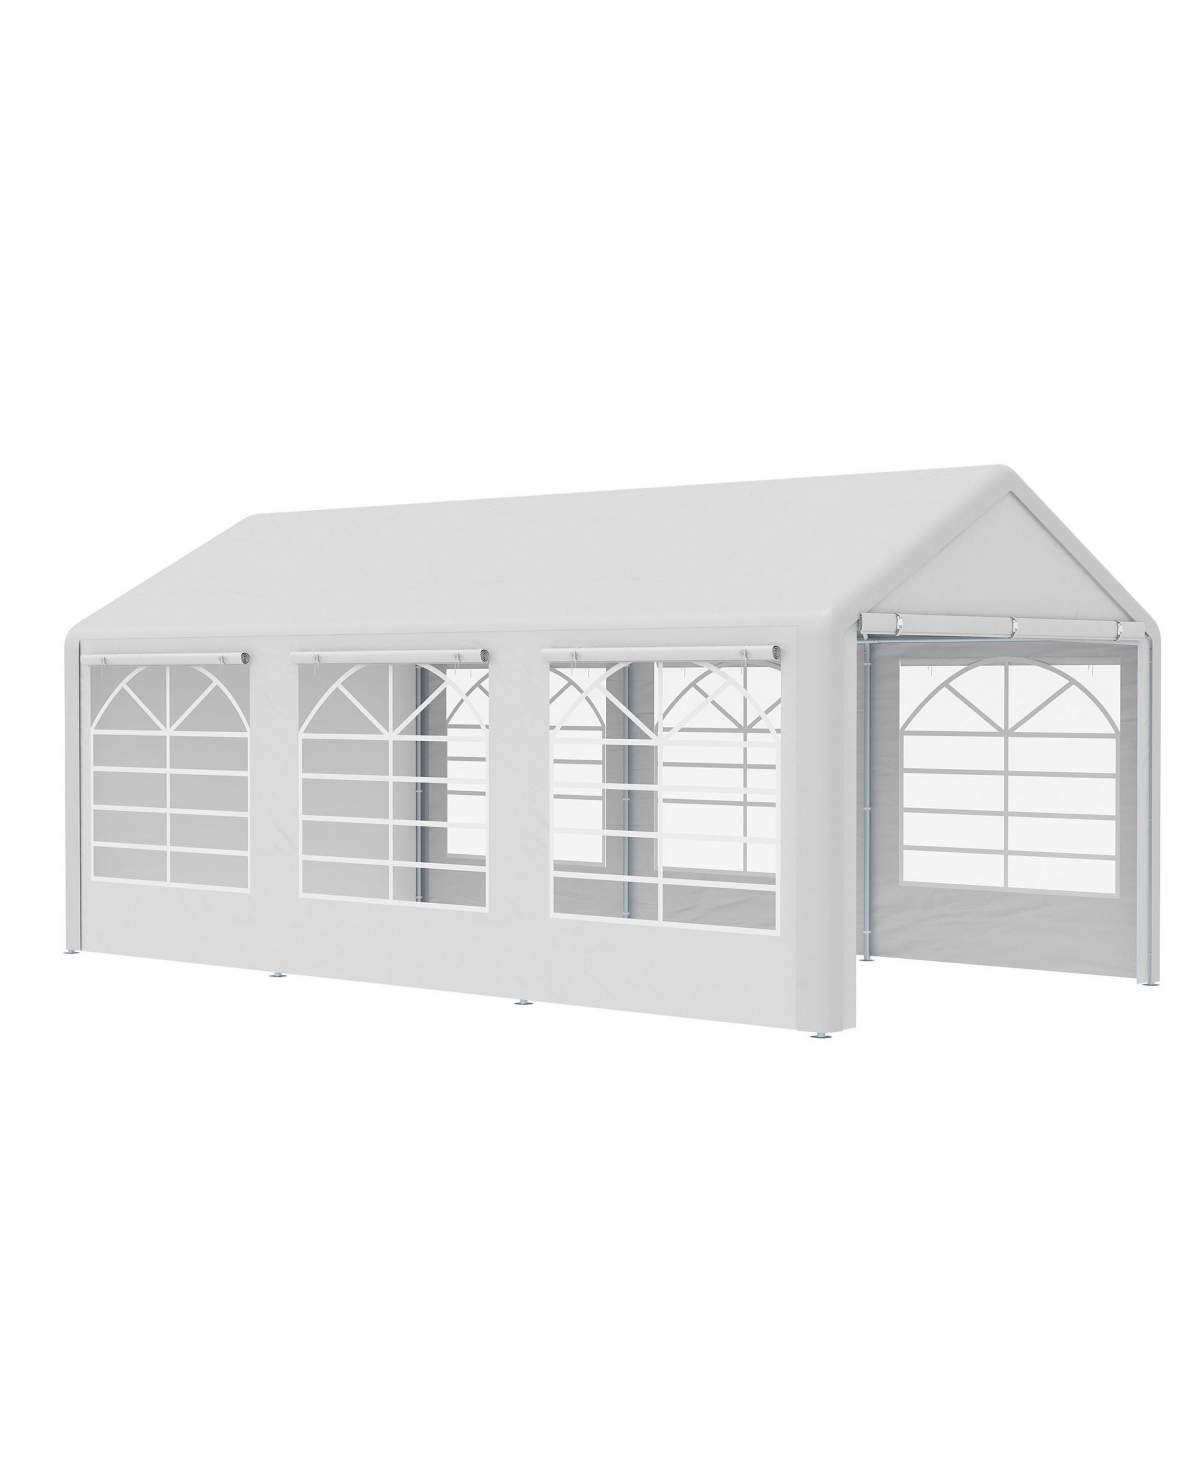 Outdoor 10 x 20ft Carport & Party Tent Canopy with Removable Sidewalls, Portable Garage Tent Boat Shelter with Windows for Party, Wedding and